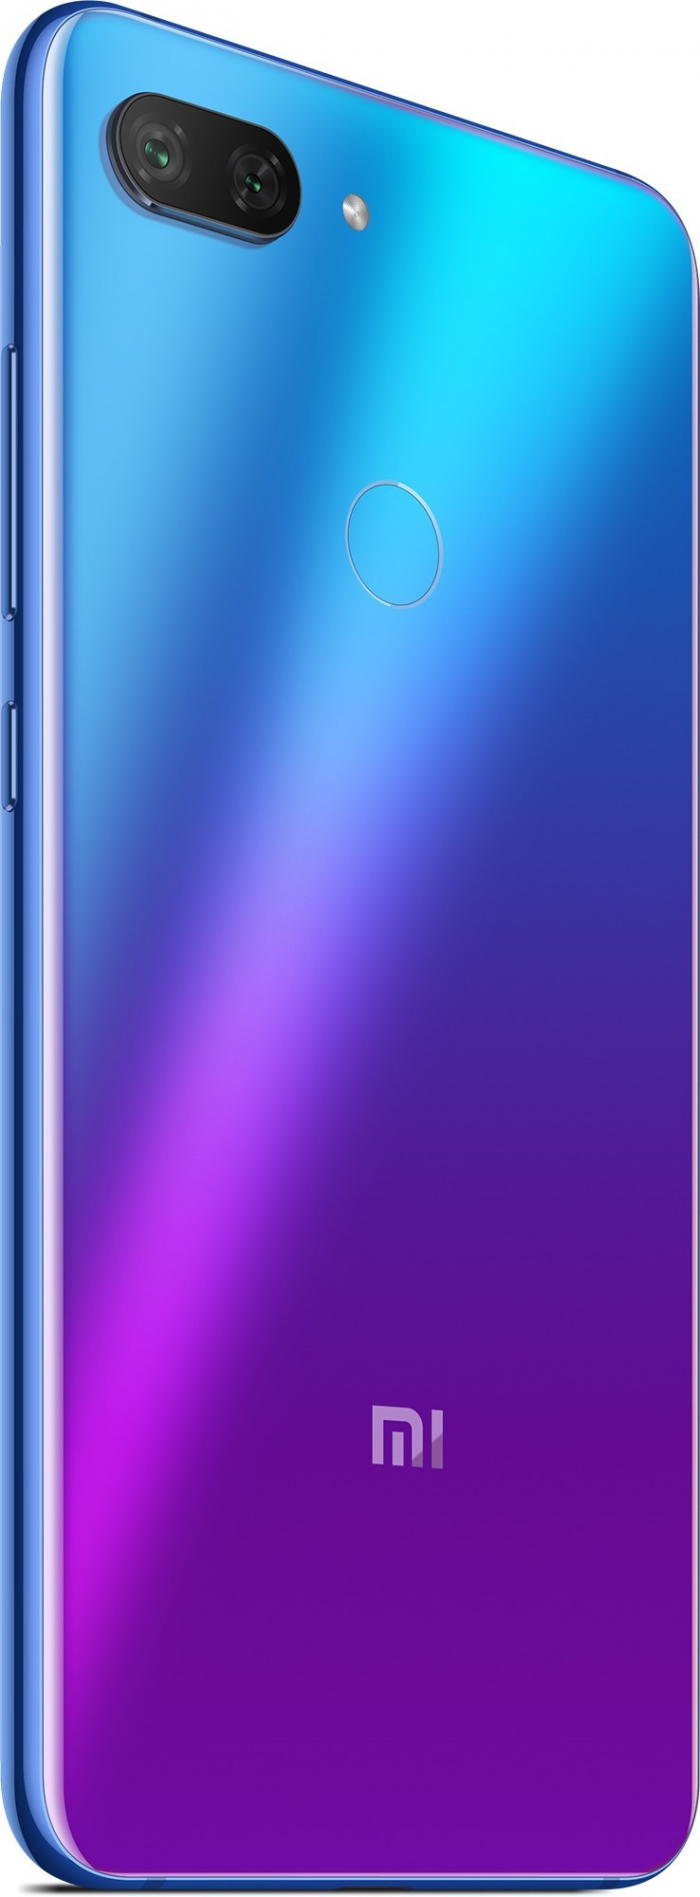 /source/pages/phonesell/xiaomi/Xiaomi_Mi_8_Lite_64gb_blue/Xiaomi_Mi_8_Lite_64gb_blue7.jpg